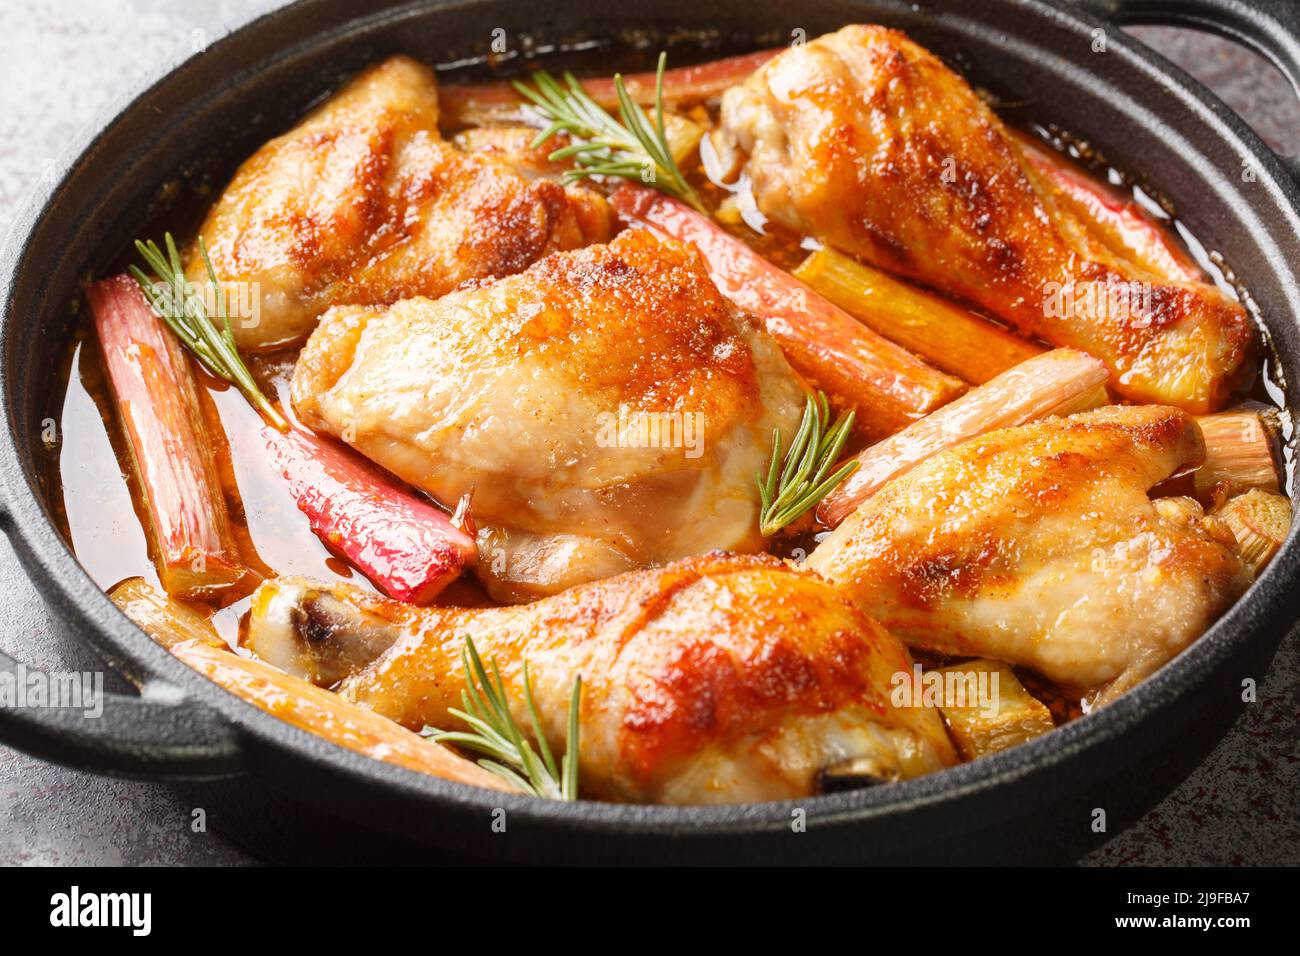 Chicken stew with rhubarb, rosemary and white wine close-up in a frying pan on the table. horizontal Stock Photo